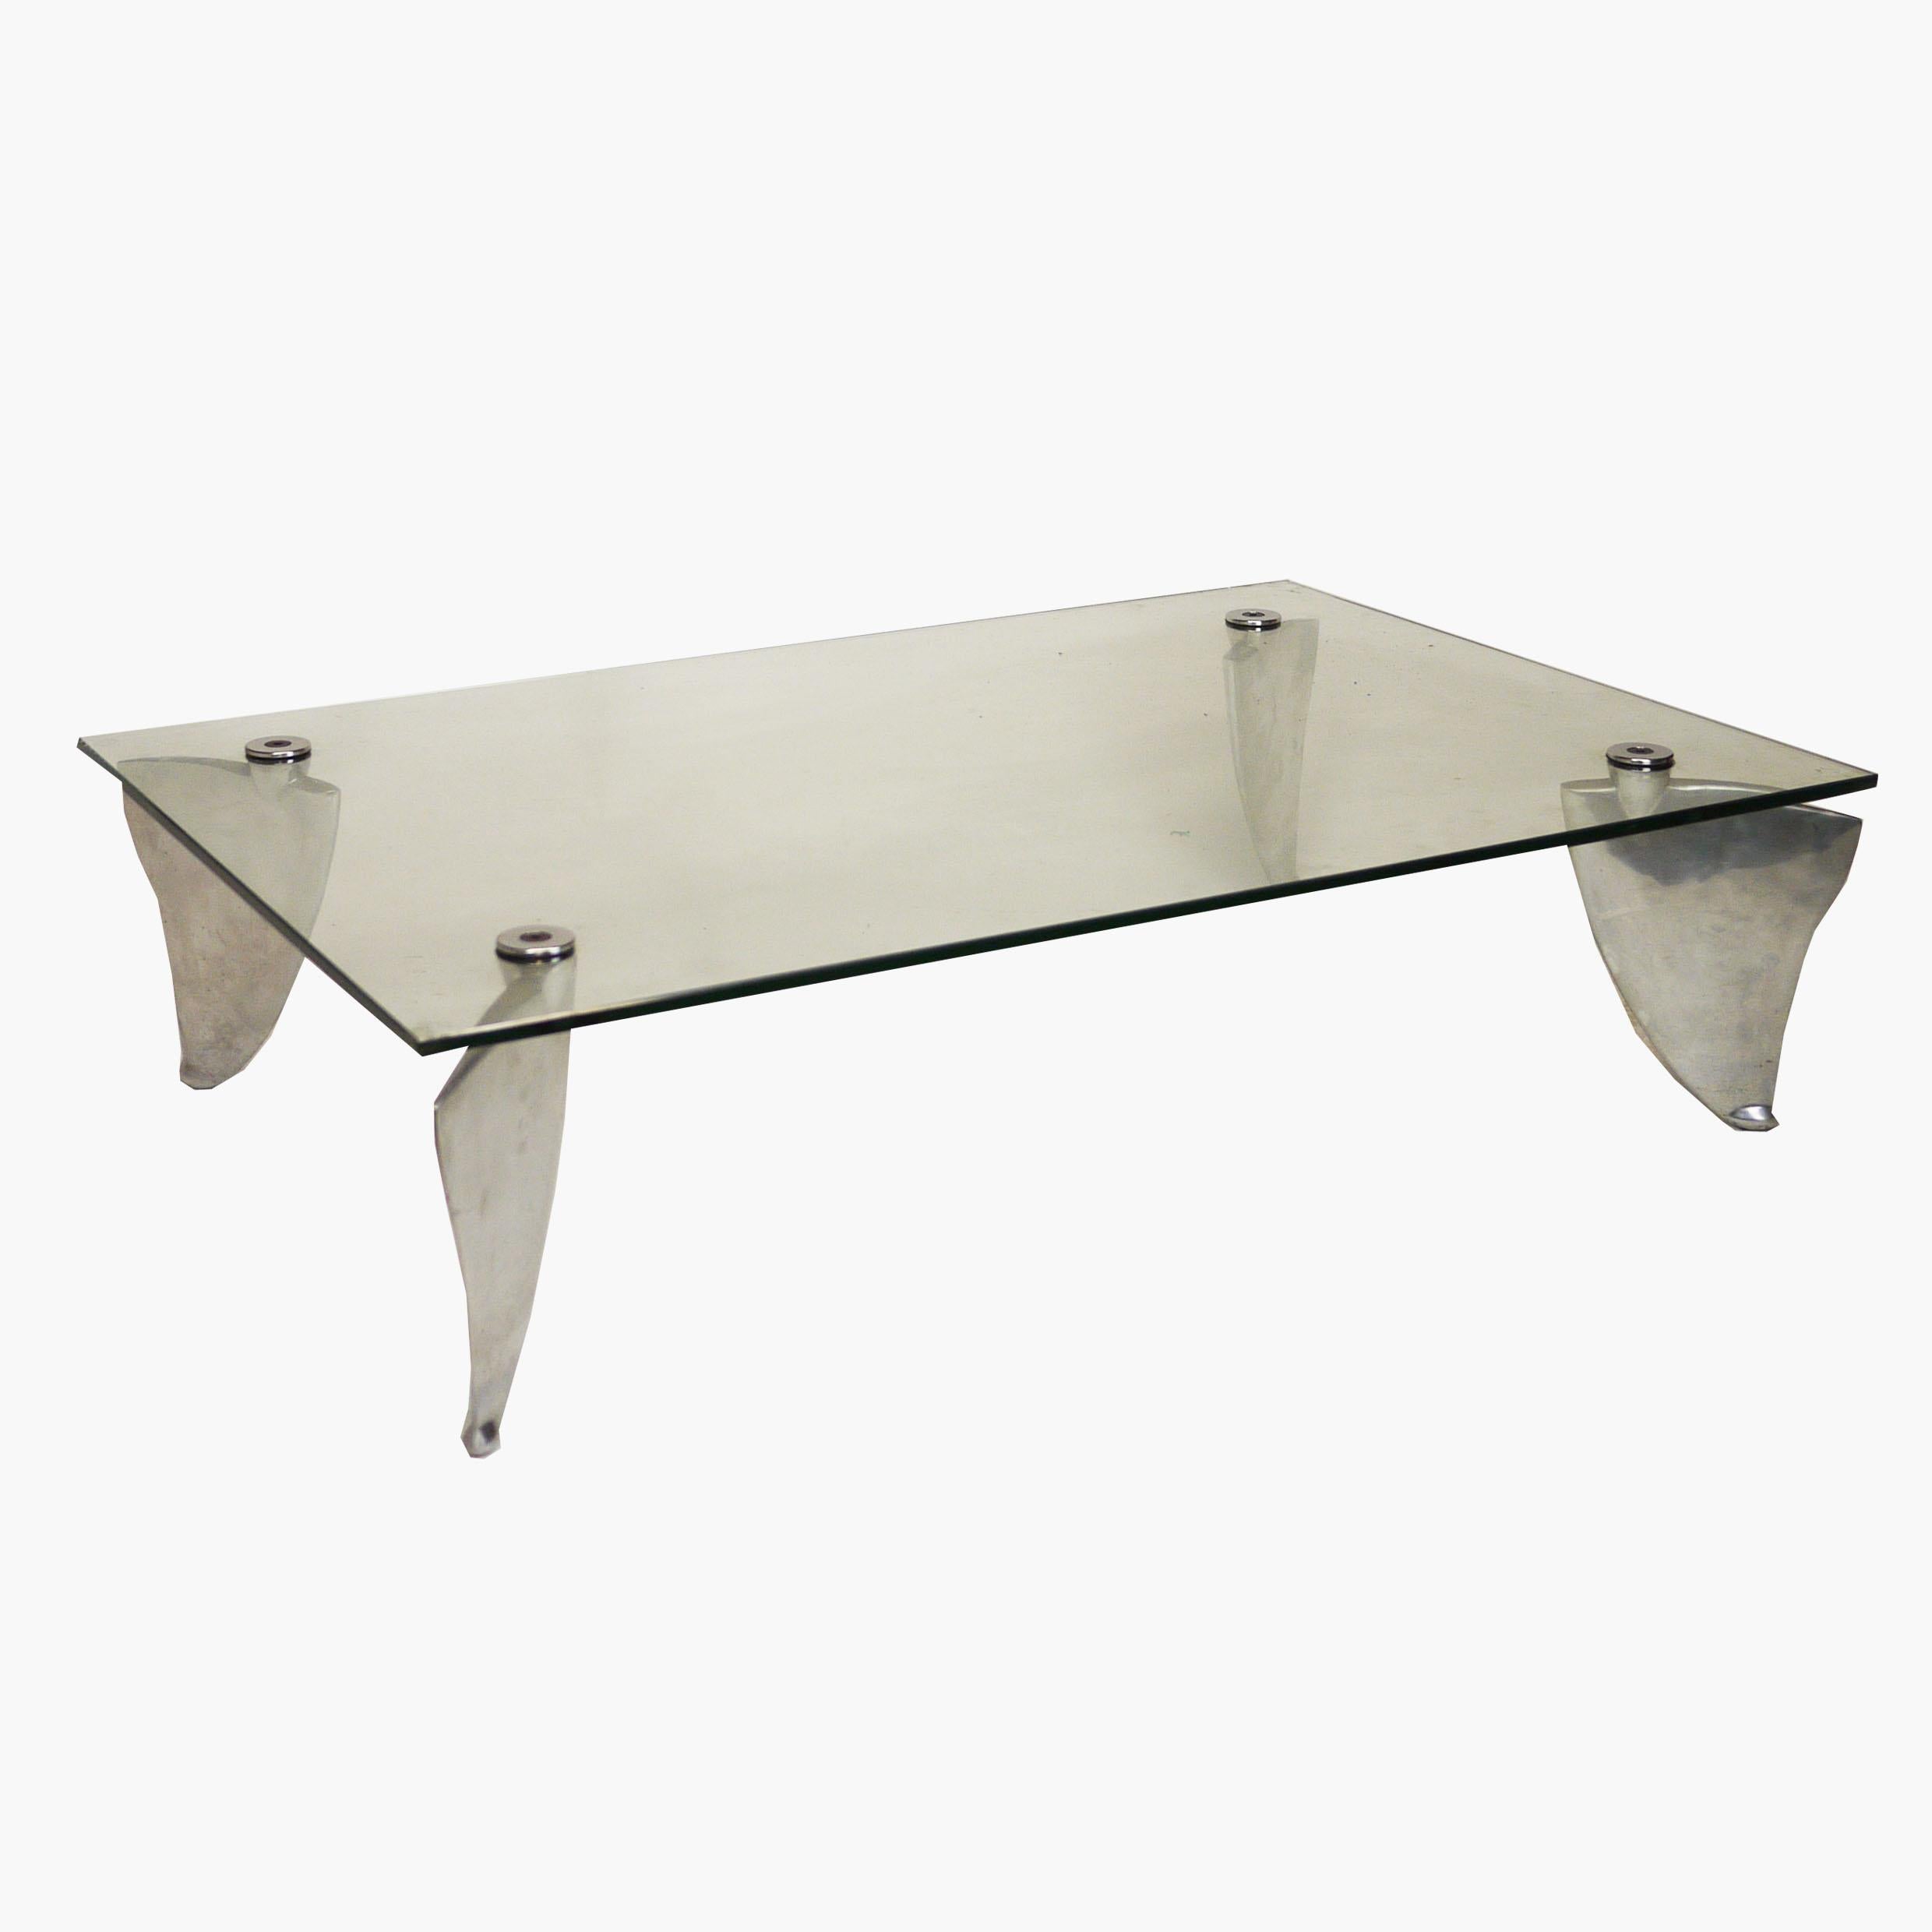 Vintage Glass and Aluminum 'Fipper' Coffee Table by Matthew Hilton for SCP, 1980 For Sale 4